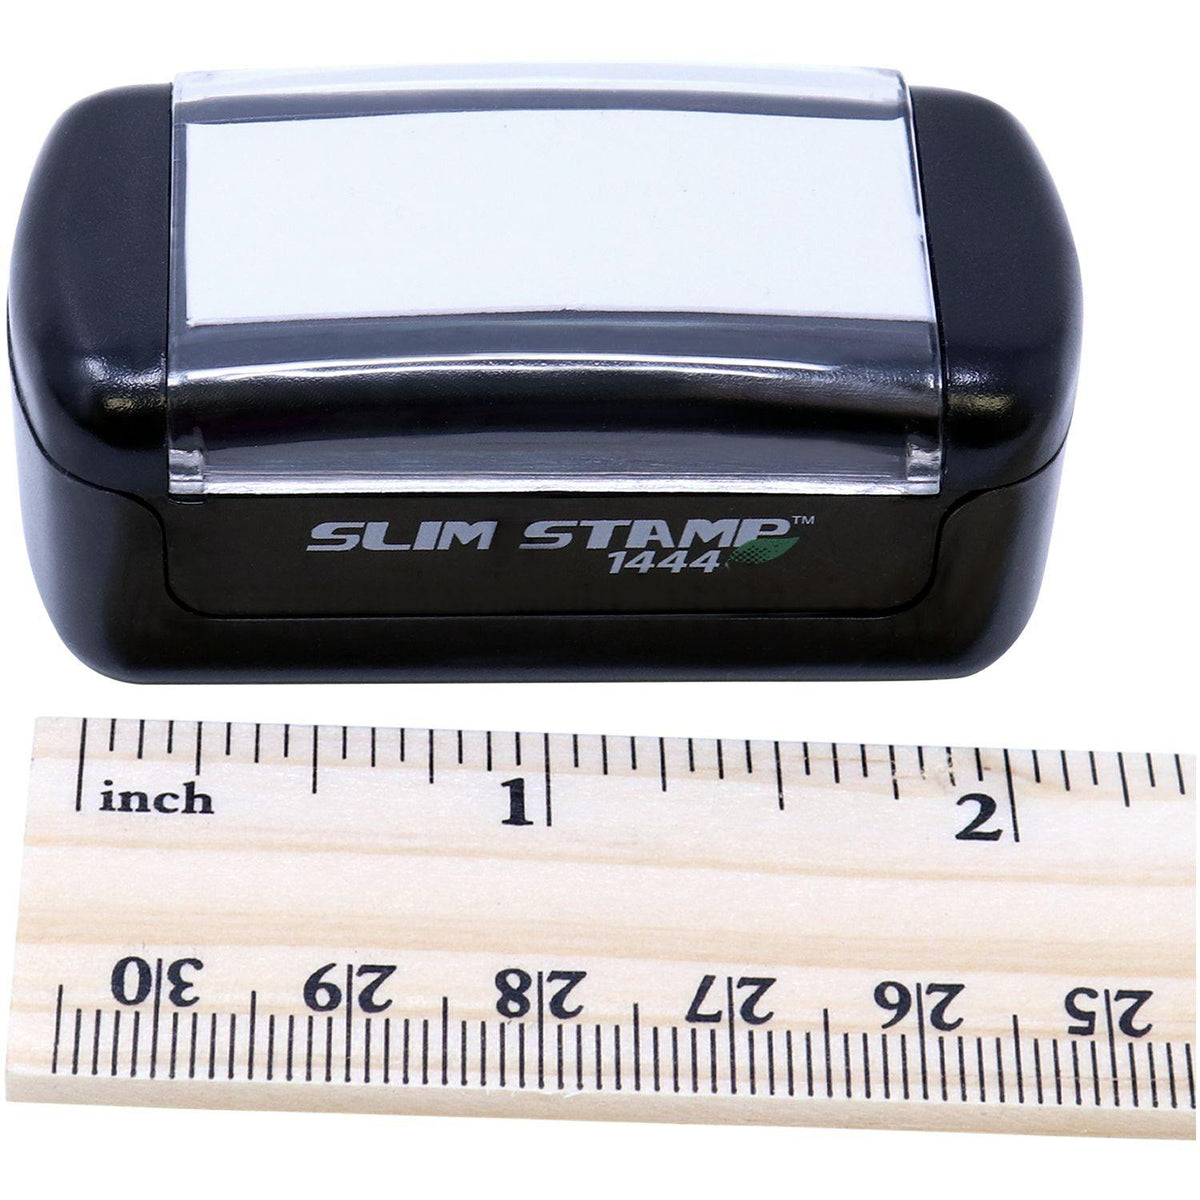 Measurement Slim Pre-Inked Special Standard Mail Stamp with Ruler